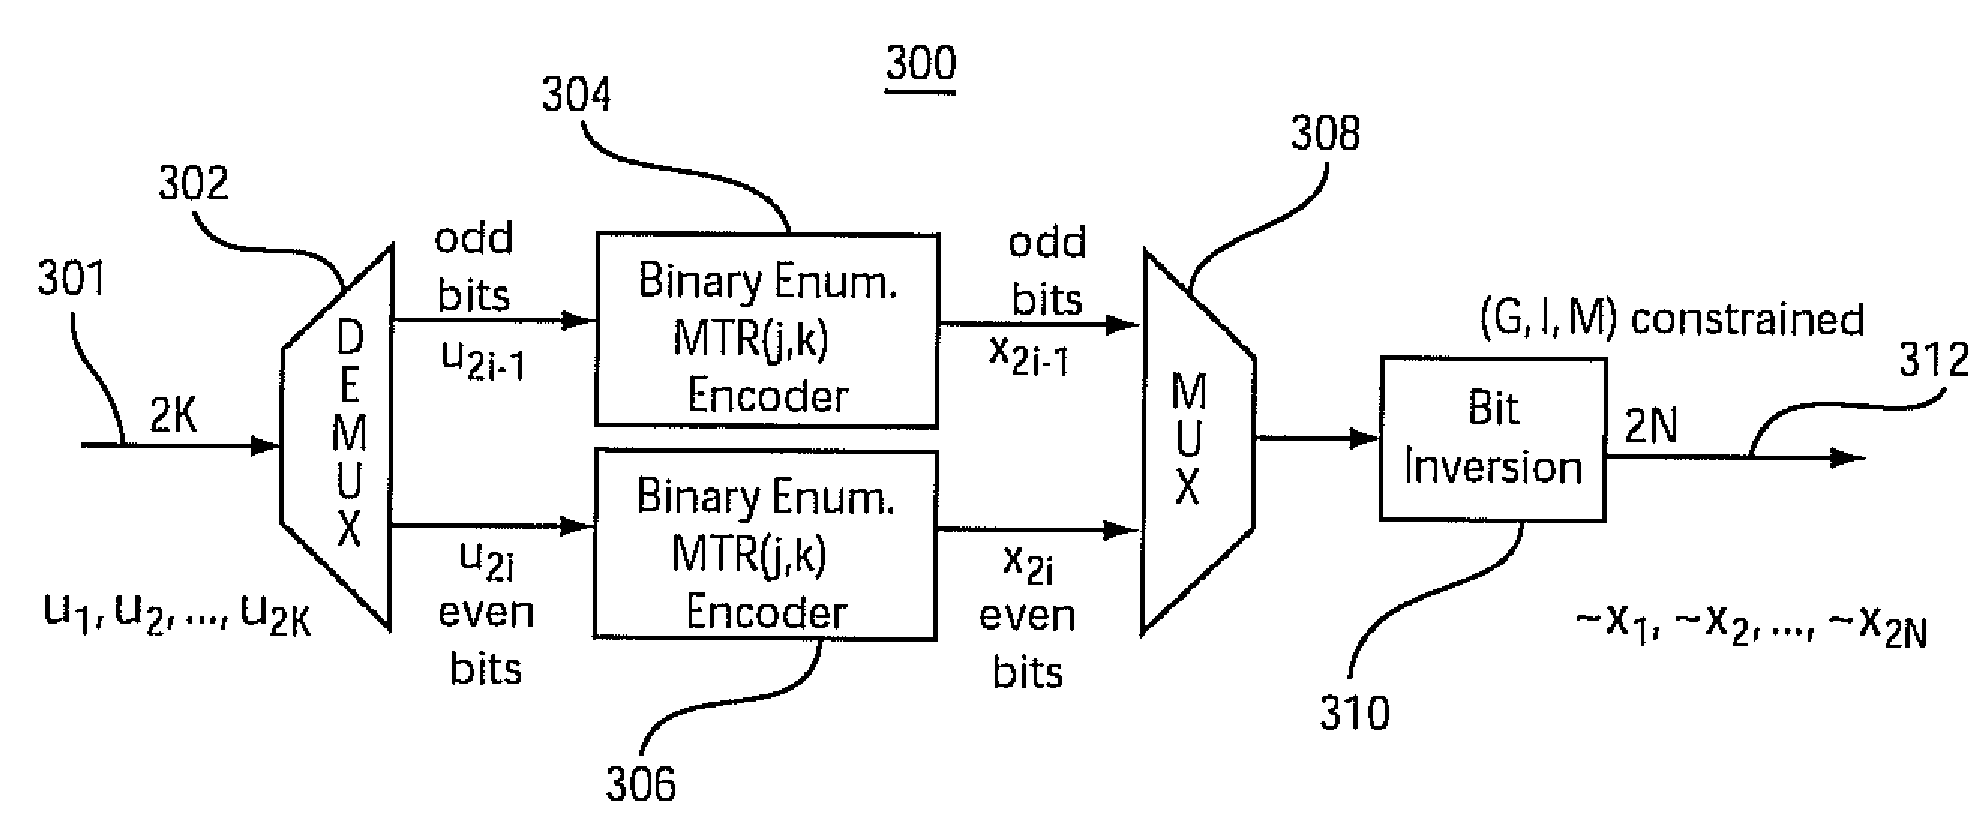 Systems and methods for enumerative encoding and decoding of maximum-transition-run codes and PRML (G,I,M) codes